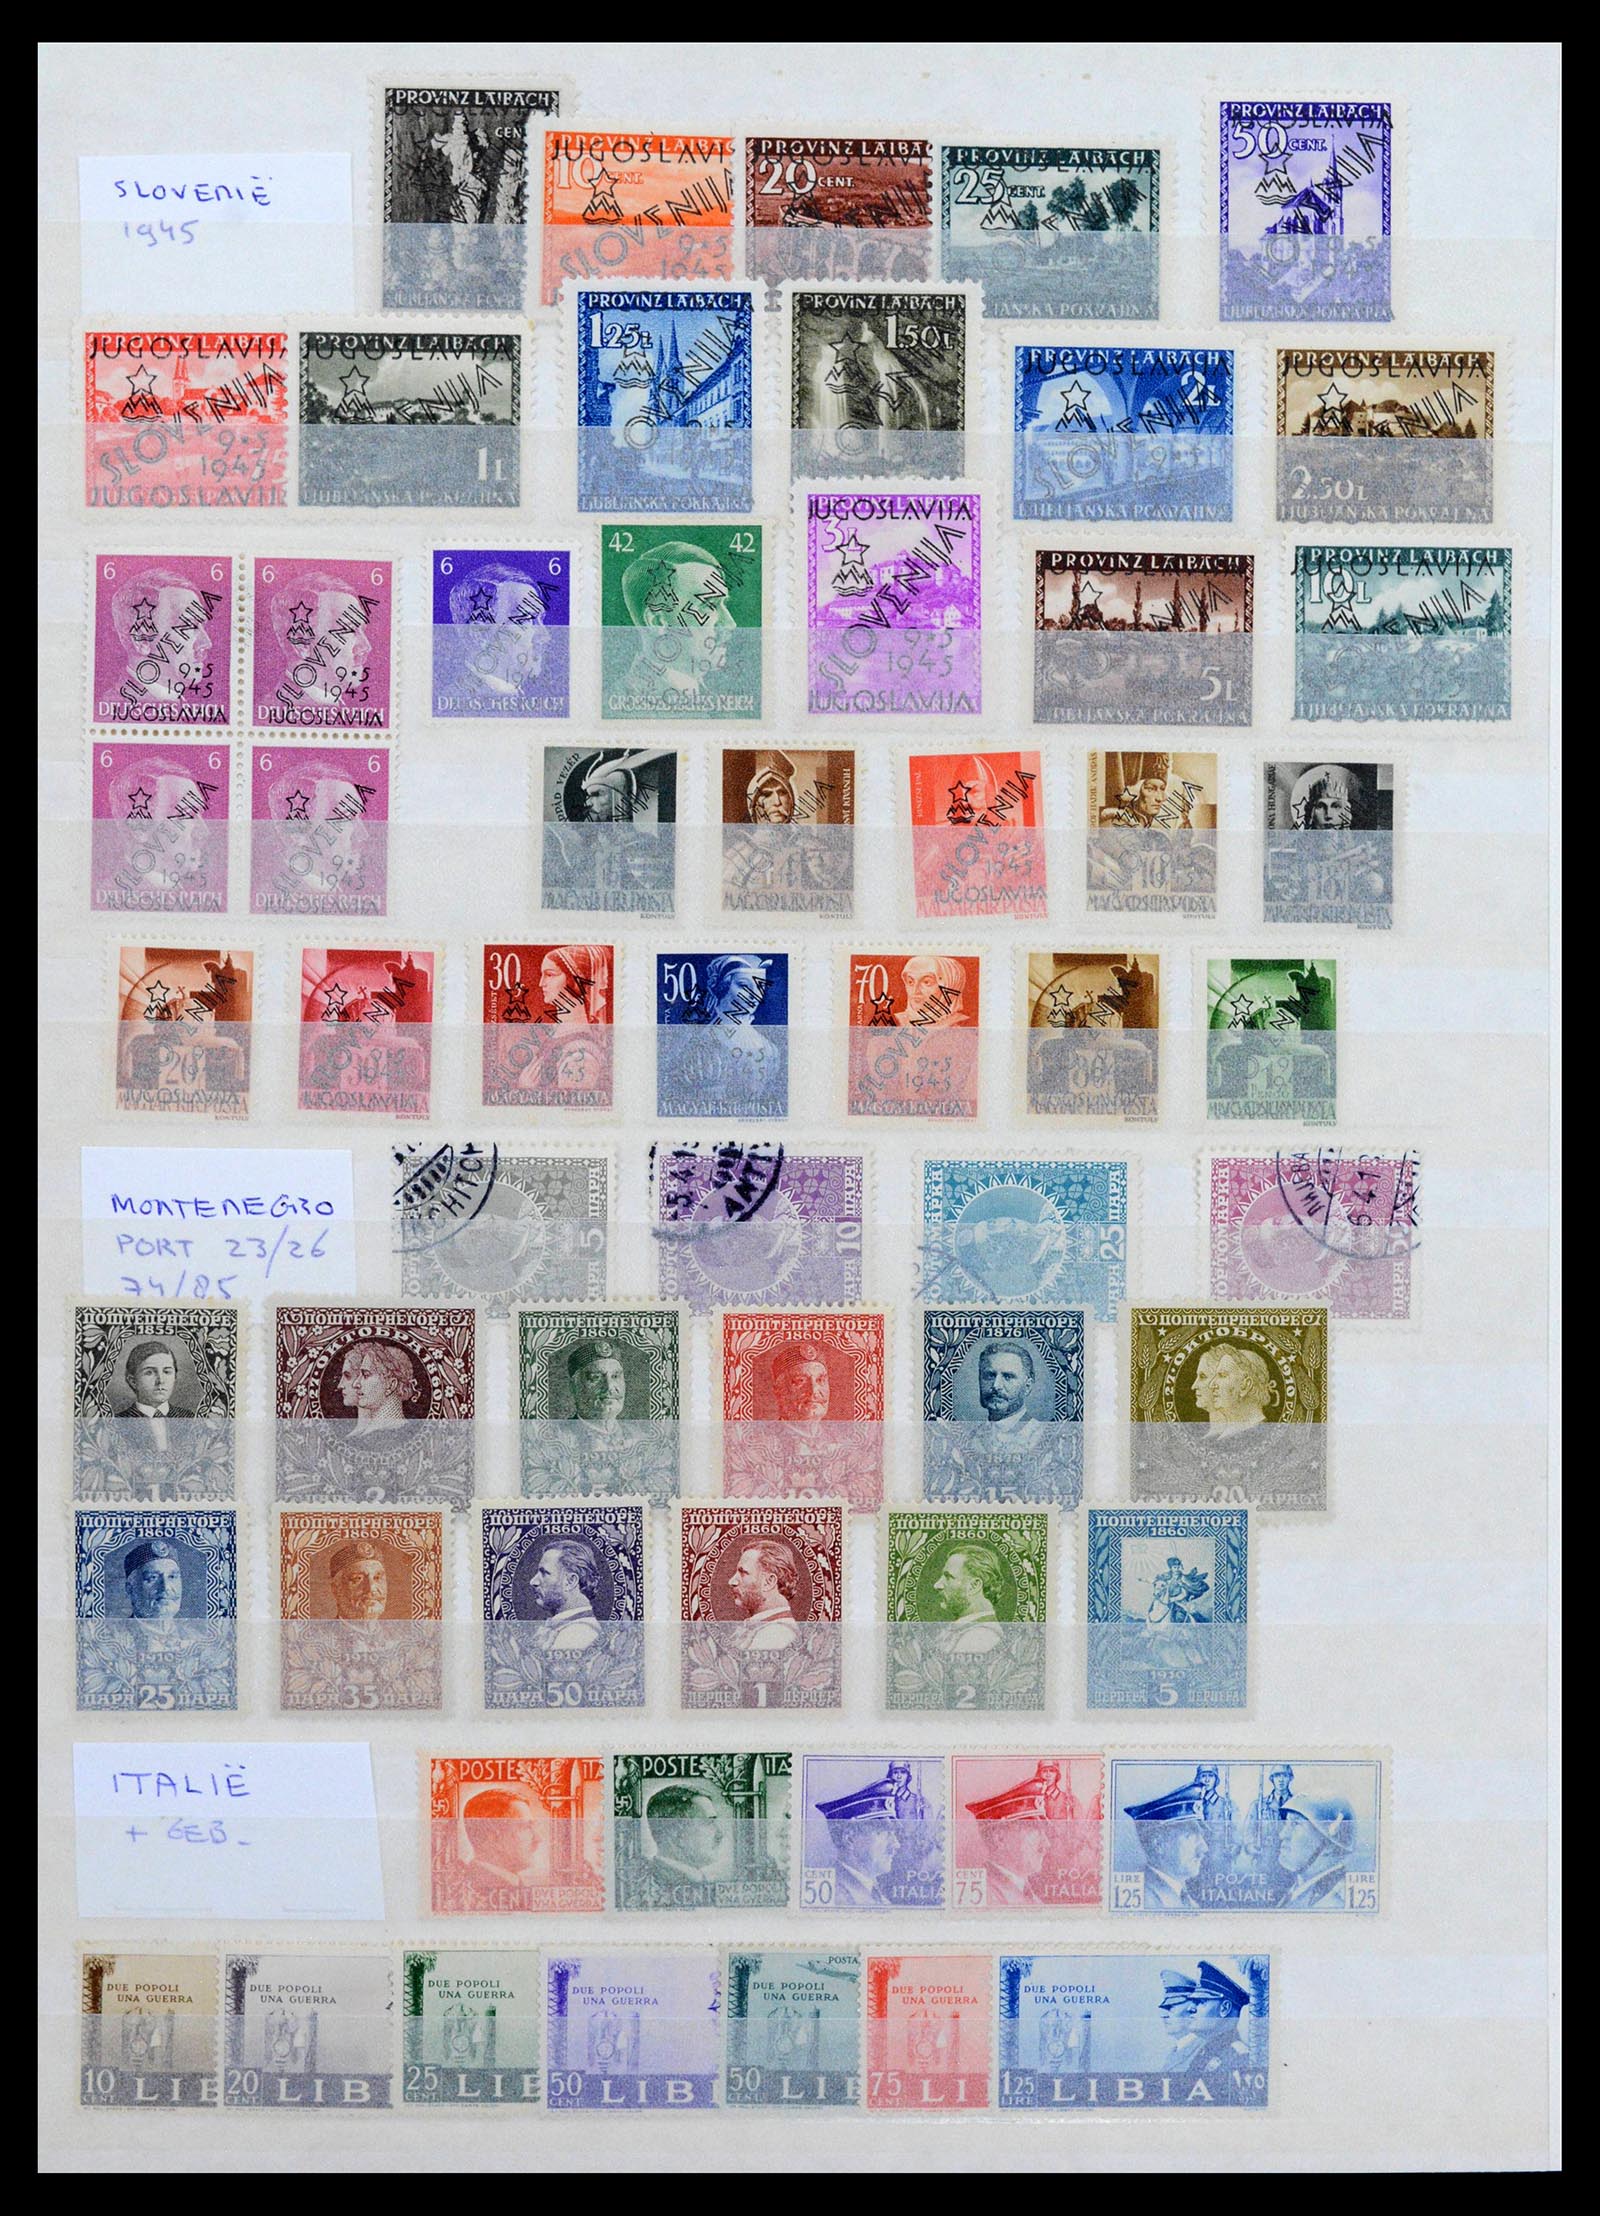 39044 0014 - Stamp collection 39044 European countries 1900-1945.